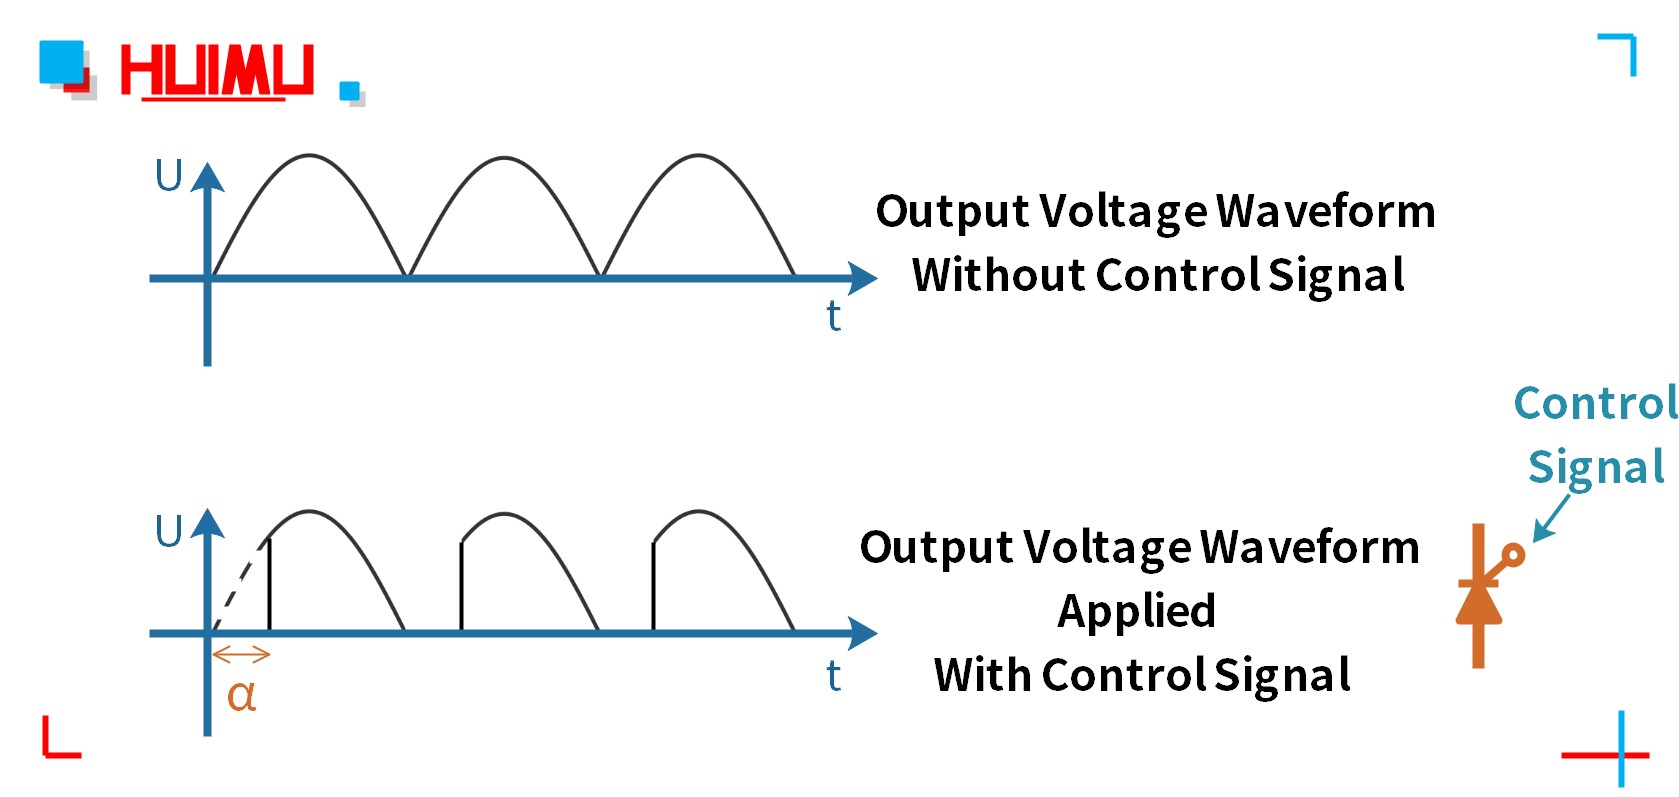 The output voltage waveform of MGR-DT series fully controlled full bridge rectification module